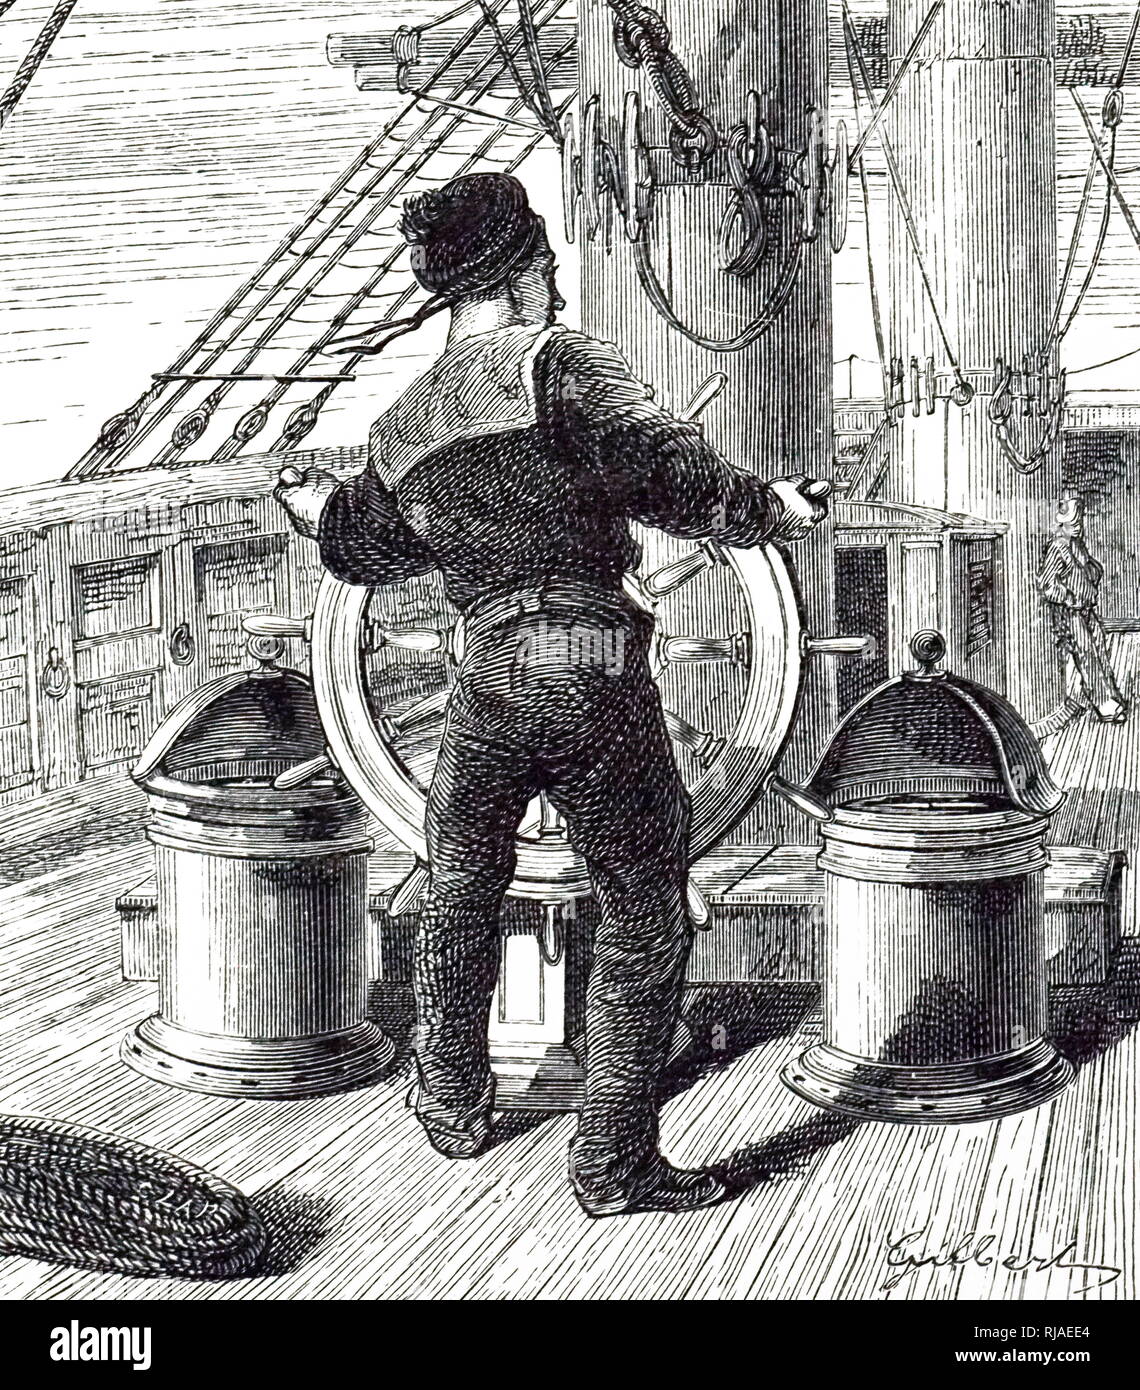 Drawing showing a Нhelmsman of a French man-of-war, keeping the ship on its' proper сcourse by referring to the compass mounted on a binnacle. 1874 Stock Photo